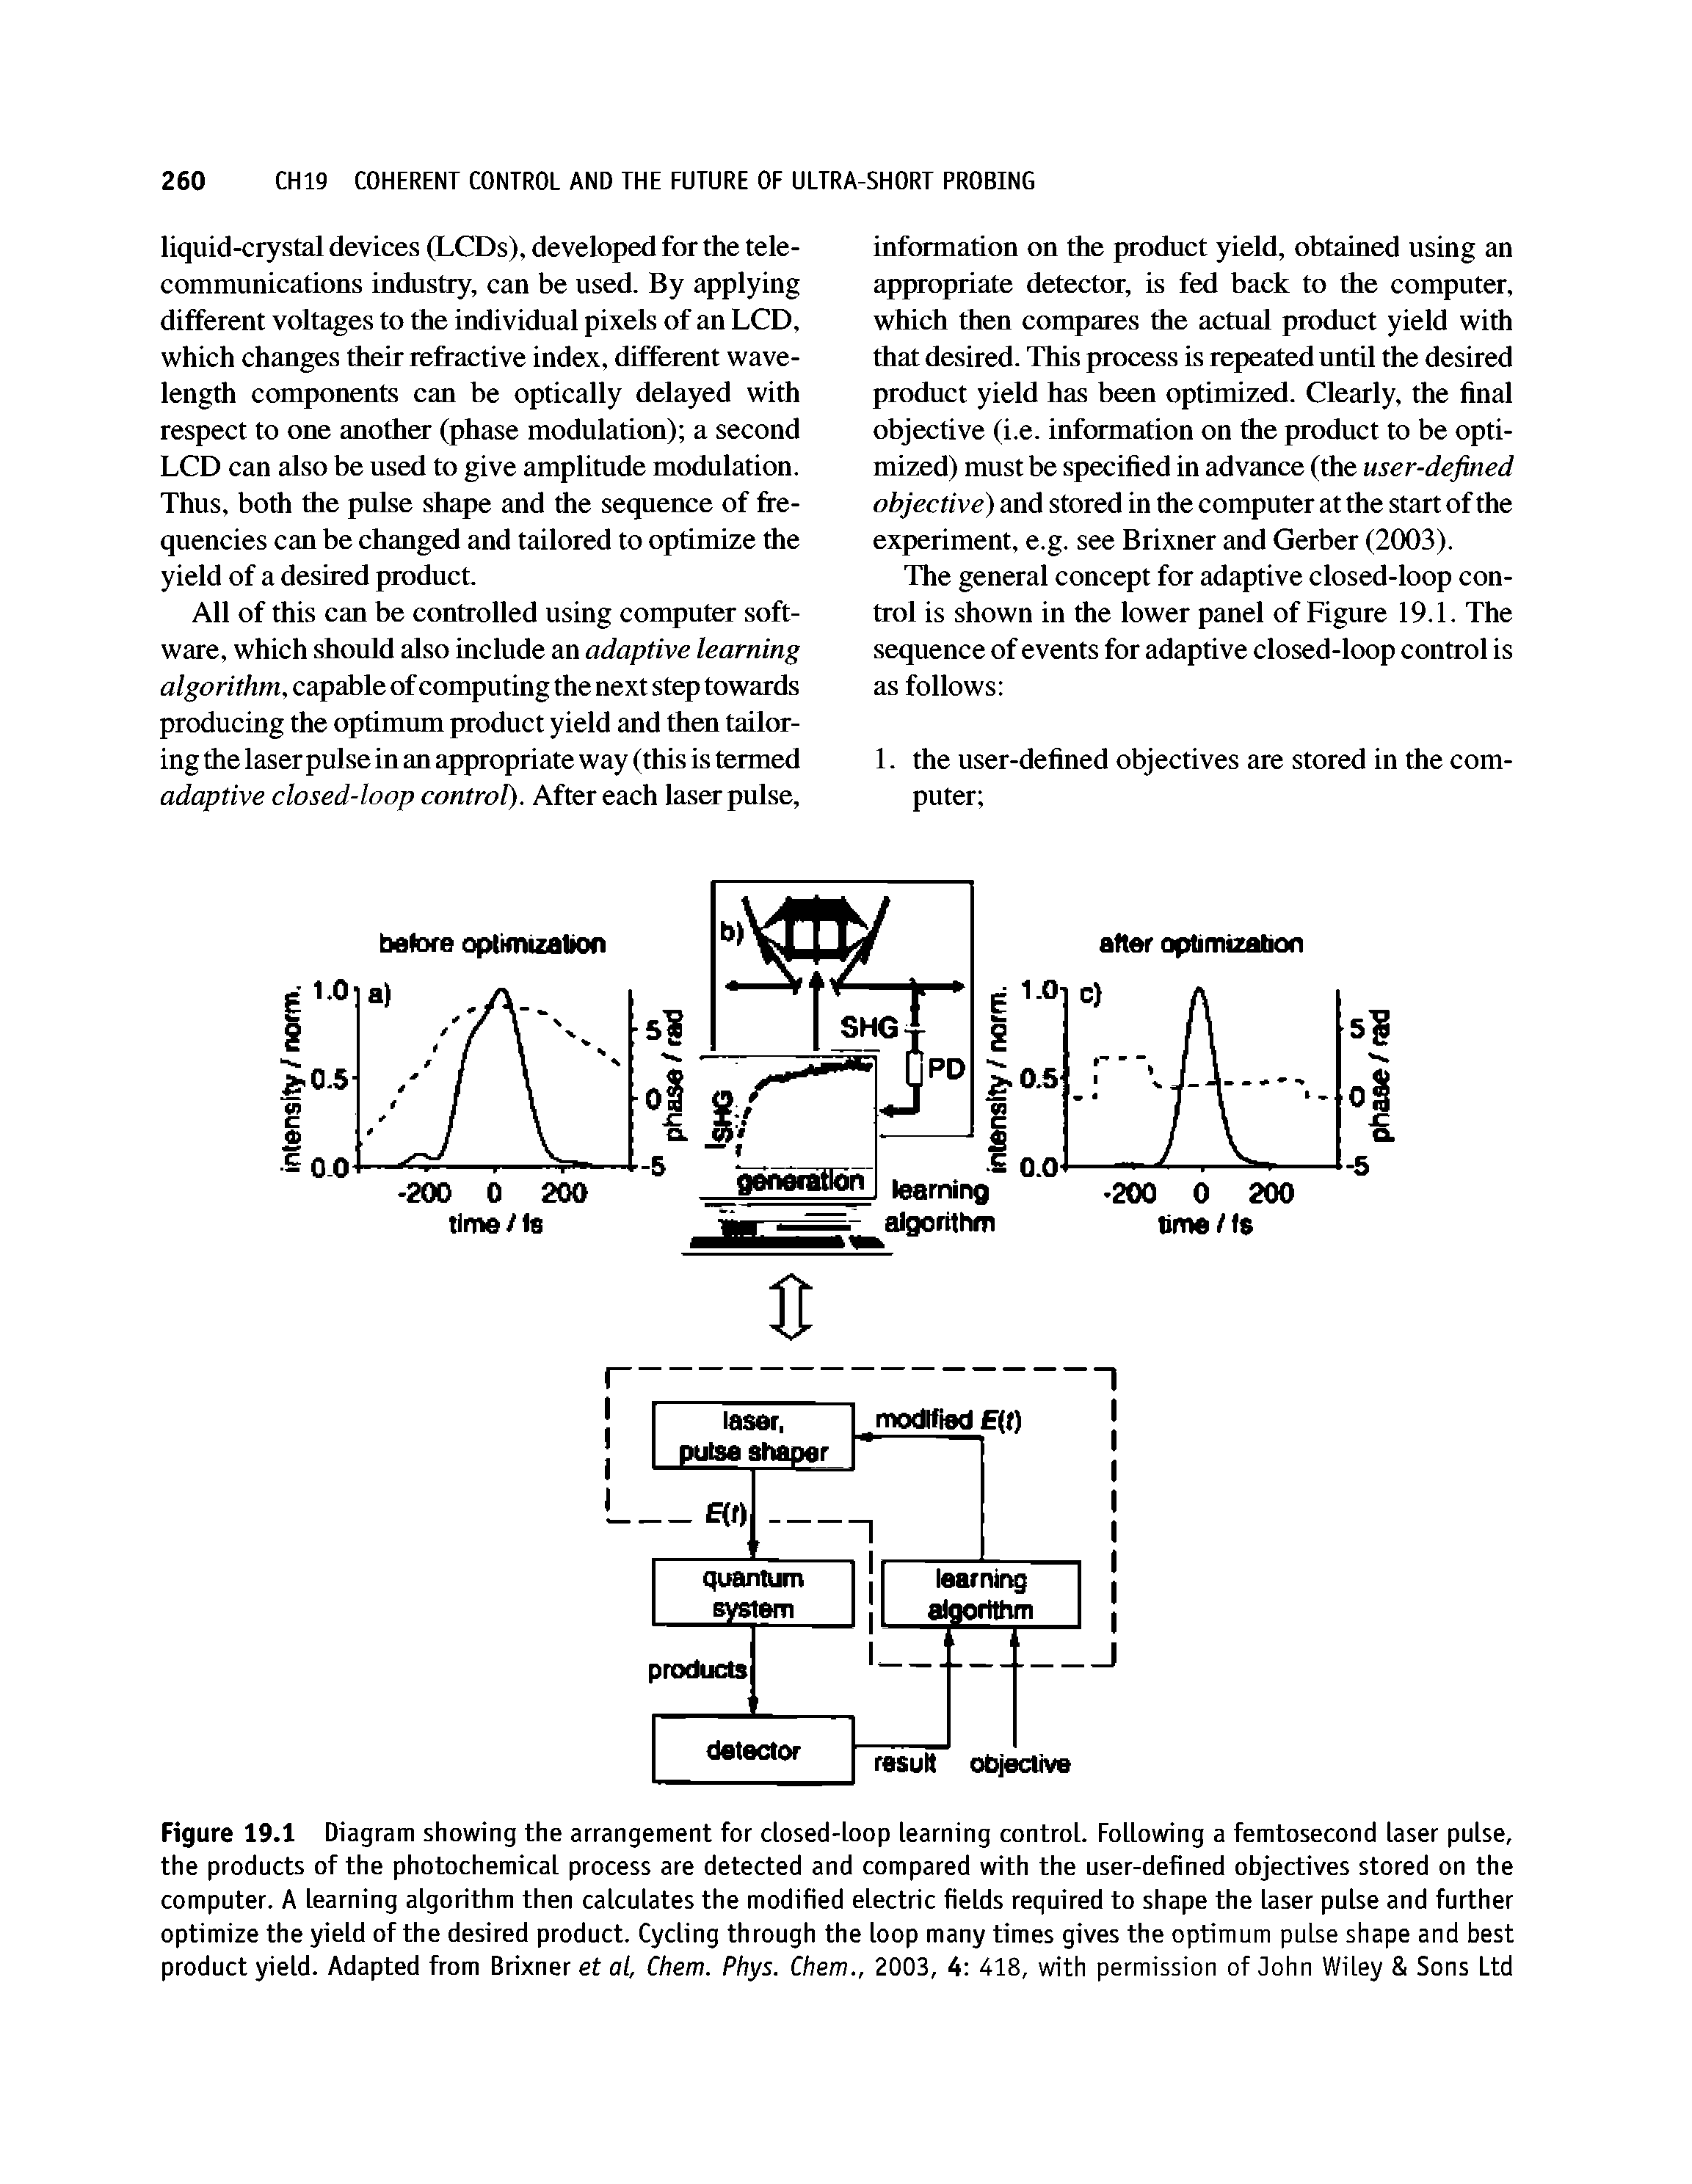 Figure 19.1 Diagram showing the arrangement for closed-loop learning control. Following a femtosecond laser pulse, the products of the photochemical process are detected and compared with the user-defined objectives stored on the computer. A learning algorithm then calculates the modified electric fields required to shape the laser pulse and further optimize the yield of the desired product. Cycling through the loop many times gives the optimum pulse shape and best product yield. Adapted from Brixner et o/, Chem. Phys. Chem., 2003, 4 418, with permission of John Wiley Sons Ltd...